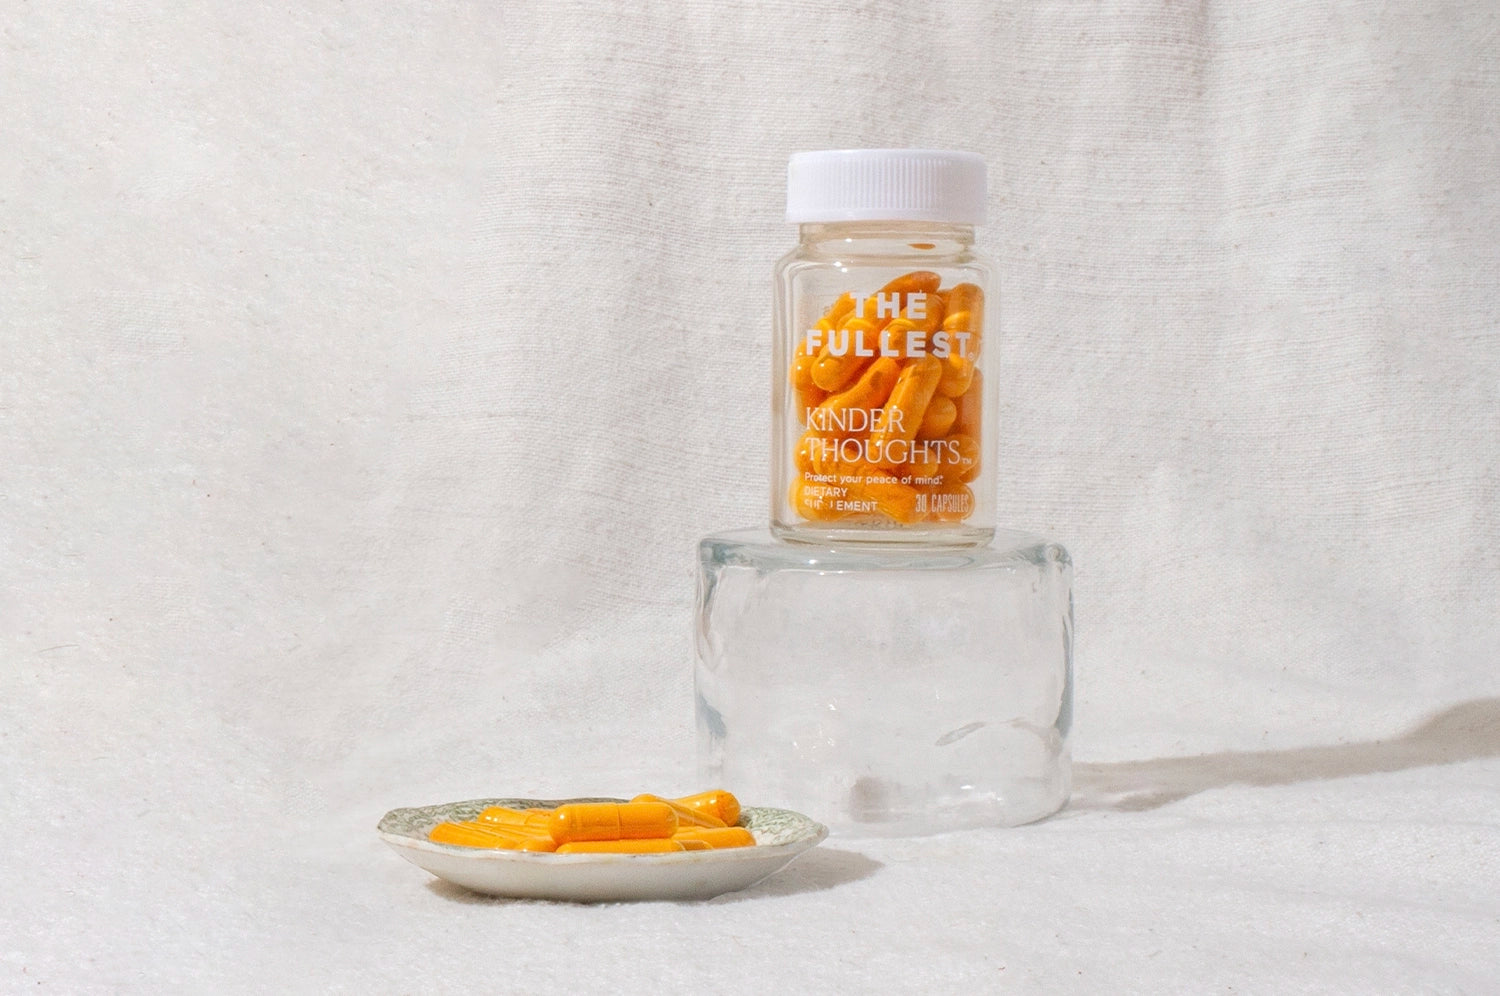 A clear pill bottle labeled "The Fullest Kinder Thoughts" filled with orange saffron and turmeric capsules, placed on a glass surface with additional capsules on a small plate nearby, against a textured white background.